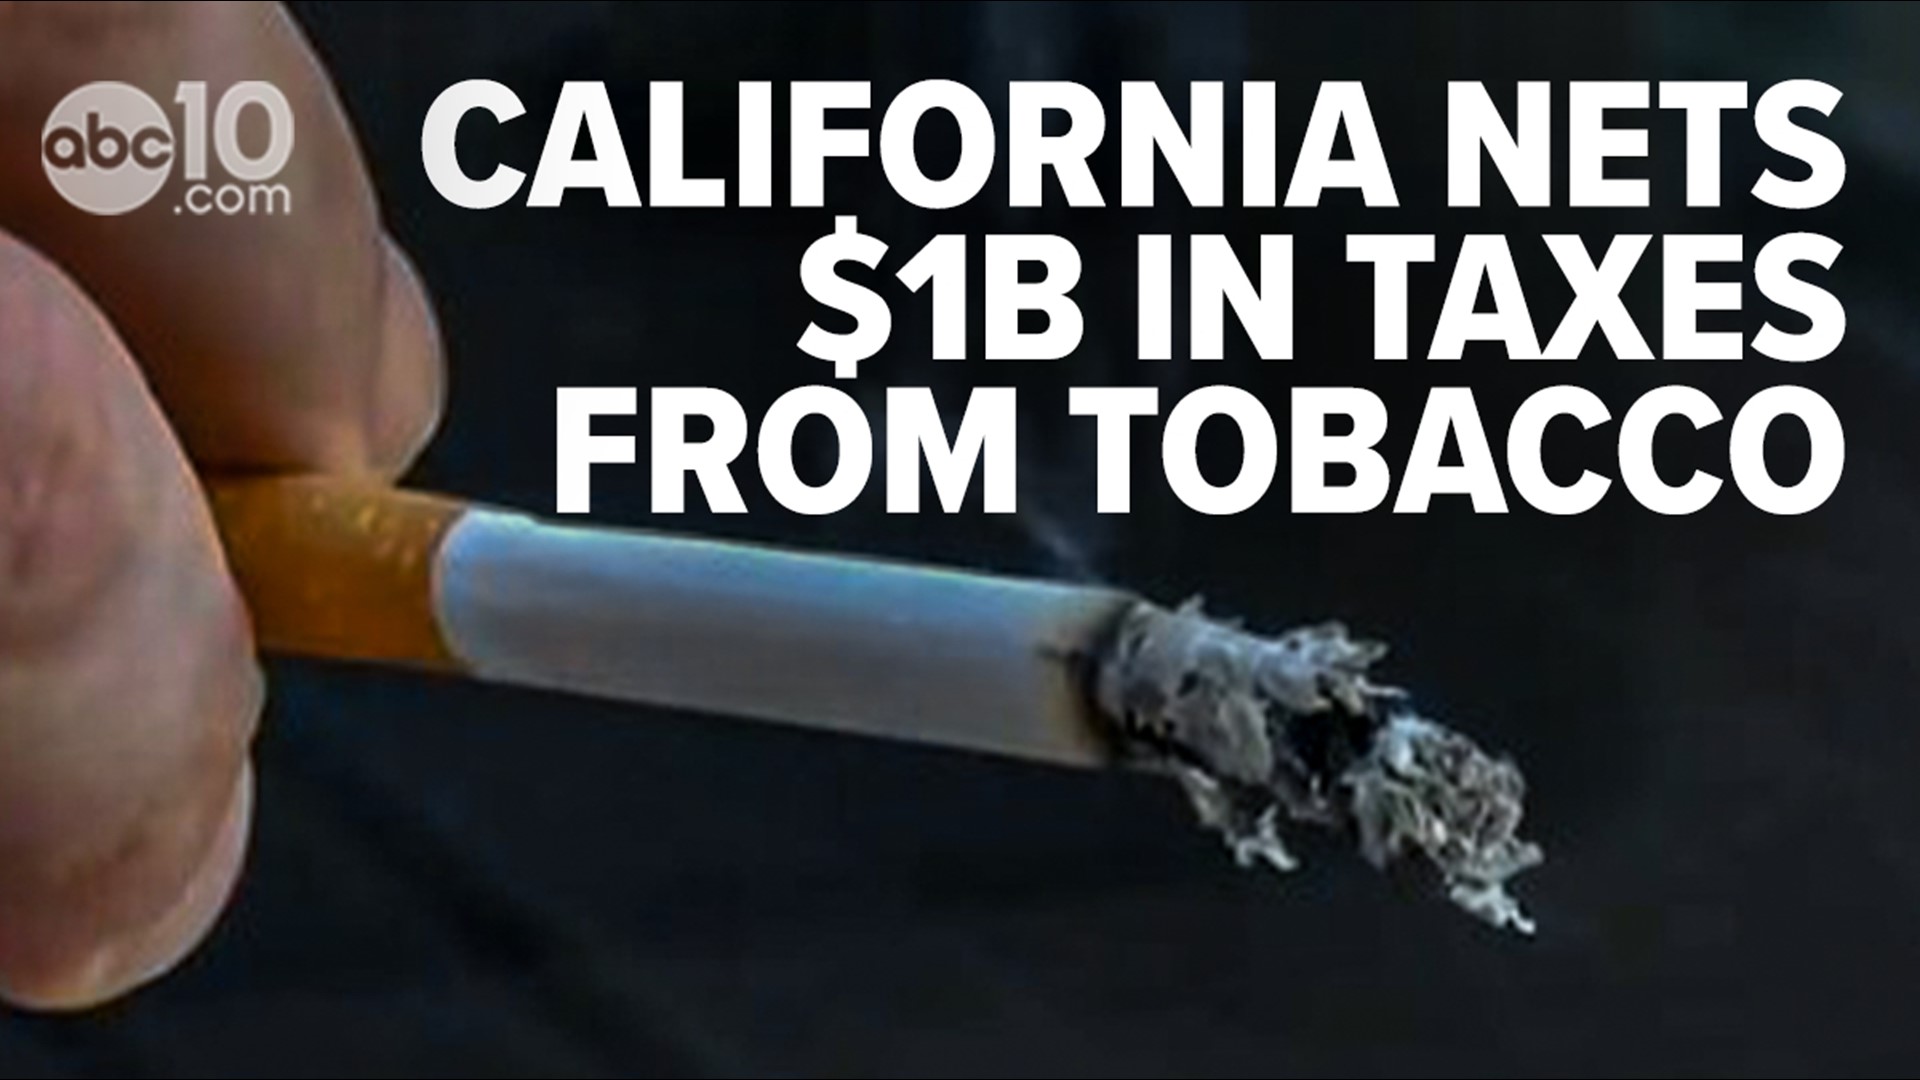 A new California bill out of the State Legislature could spring a lifetime tobacco ban on people born after 2006. Our political reporter Morgan Rynor breaks it down.